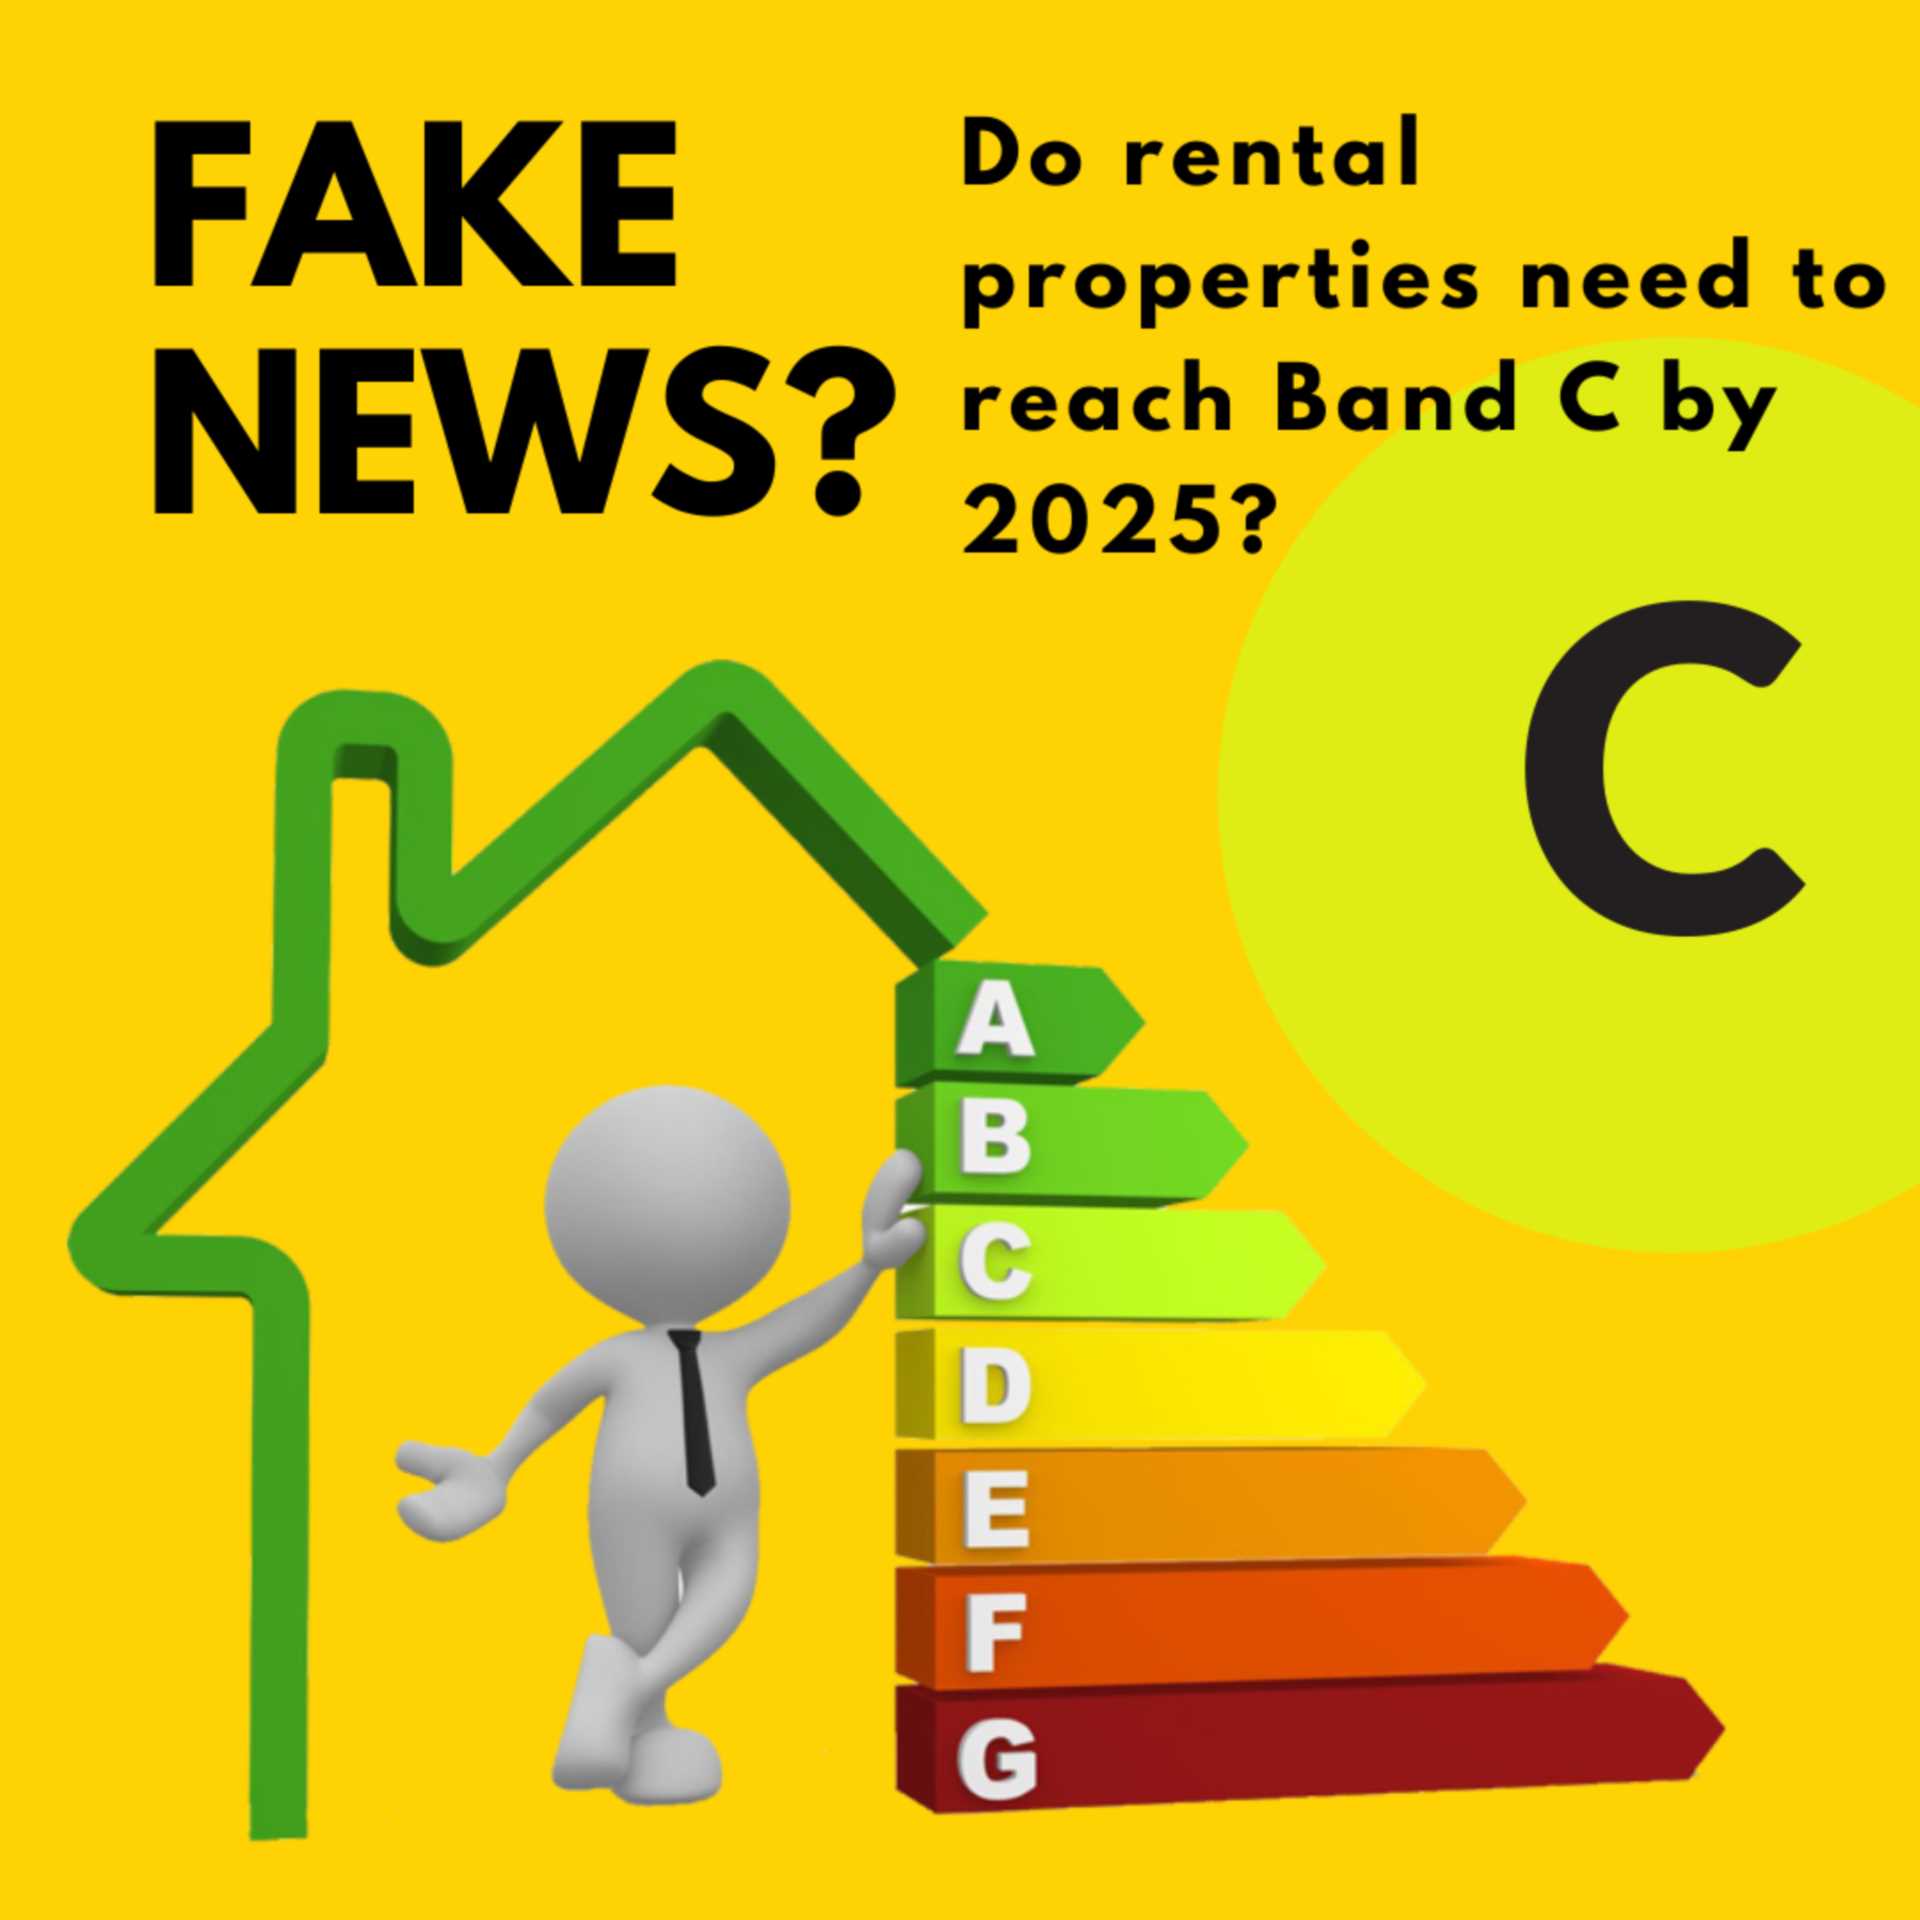 Energy Performance Certificates (EPCs) and the mysterious case of the fake news!